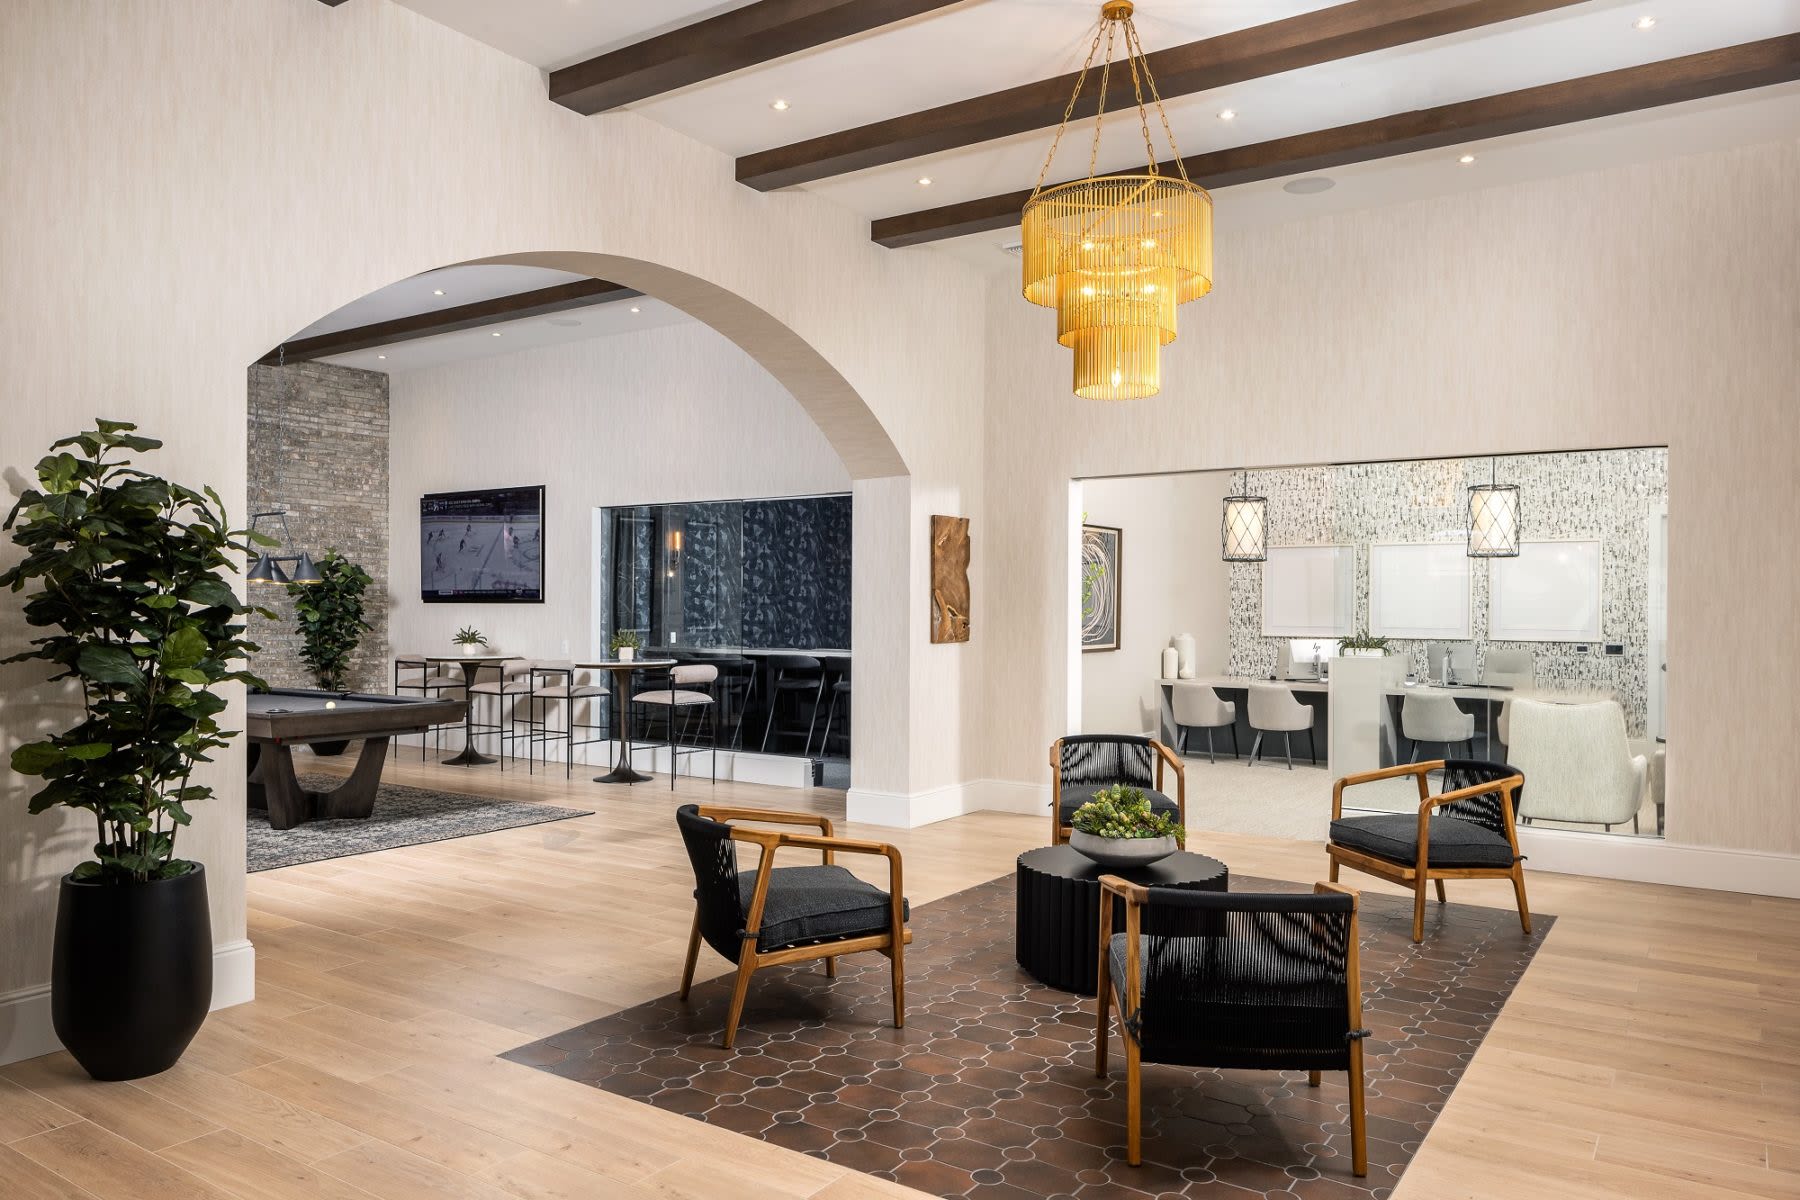 Discover a well-appointed furnished clubhouse featuring natural light, modern furnishings, and elegant wood-style flooring at Locklyn West Palm in West Palm Beach, Florida